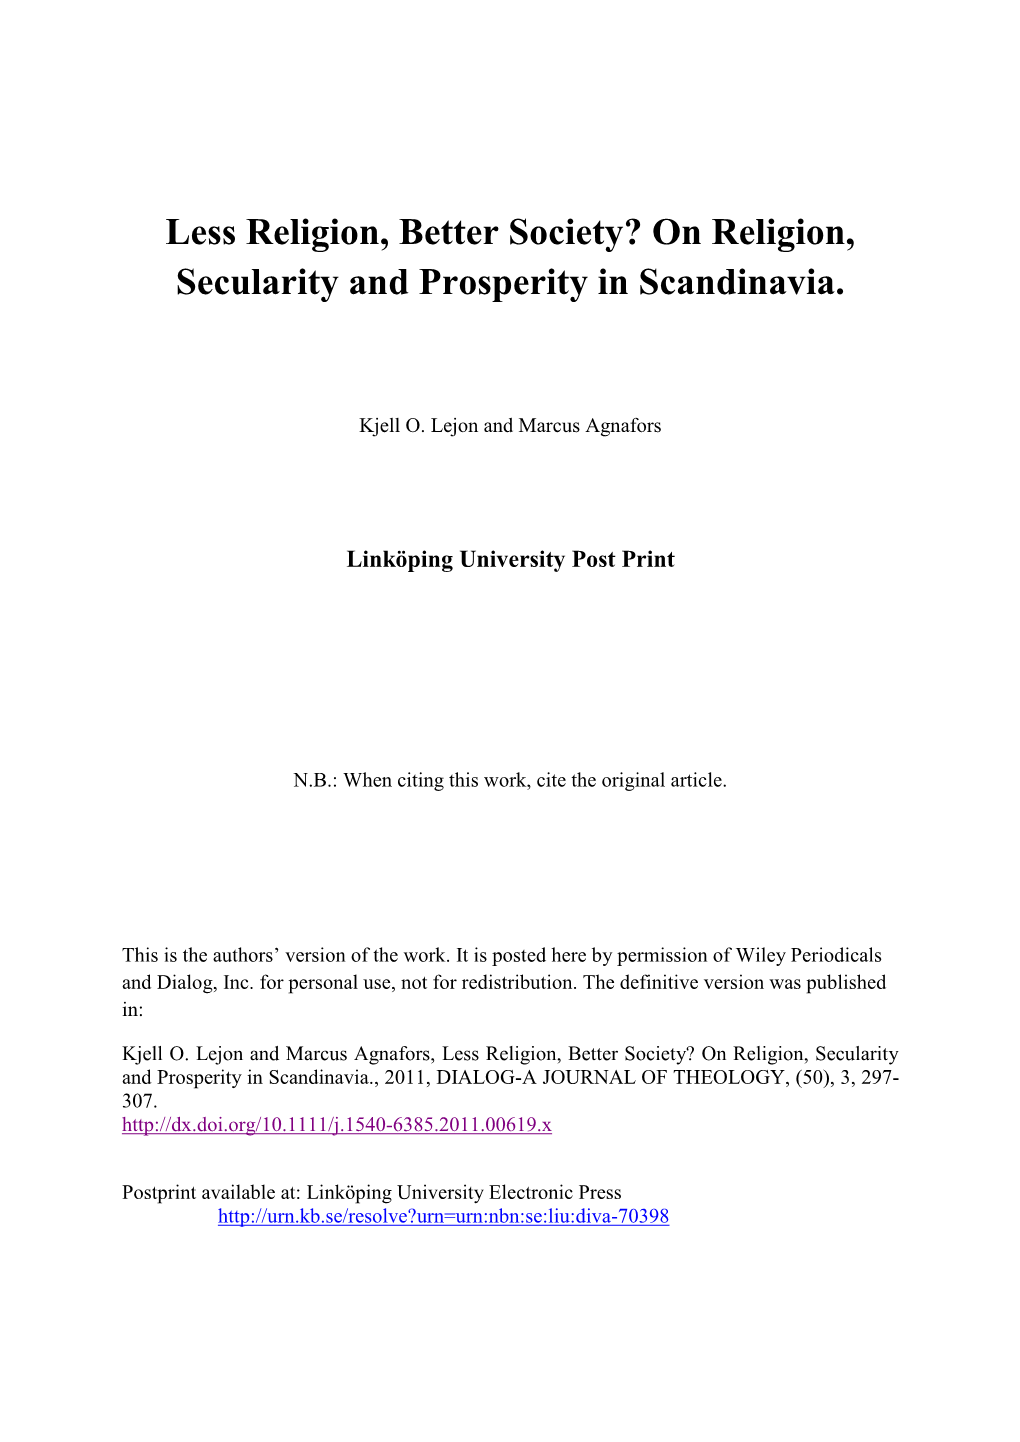 On Religion, Secularity and Prosperity in Scandinavia